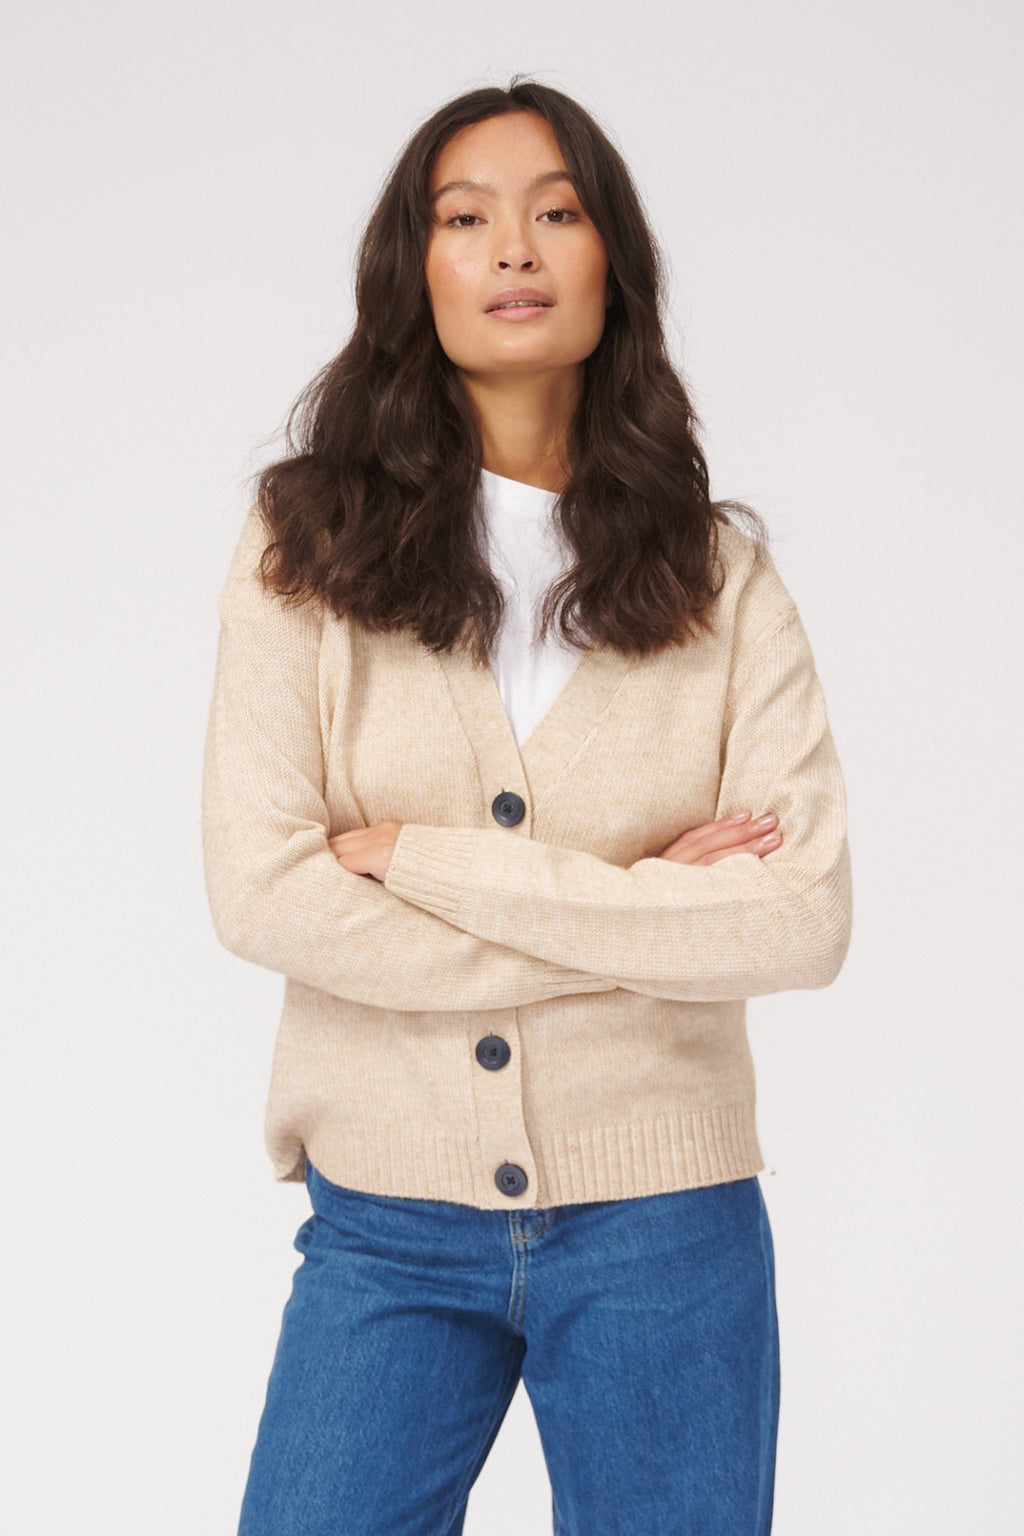 Knitted Cardigan - Beige